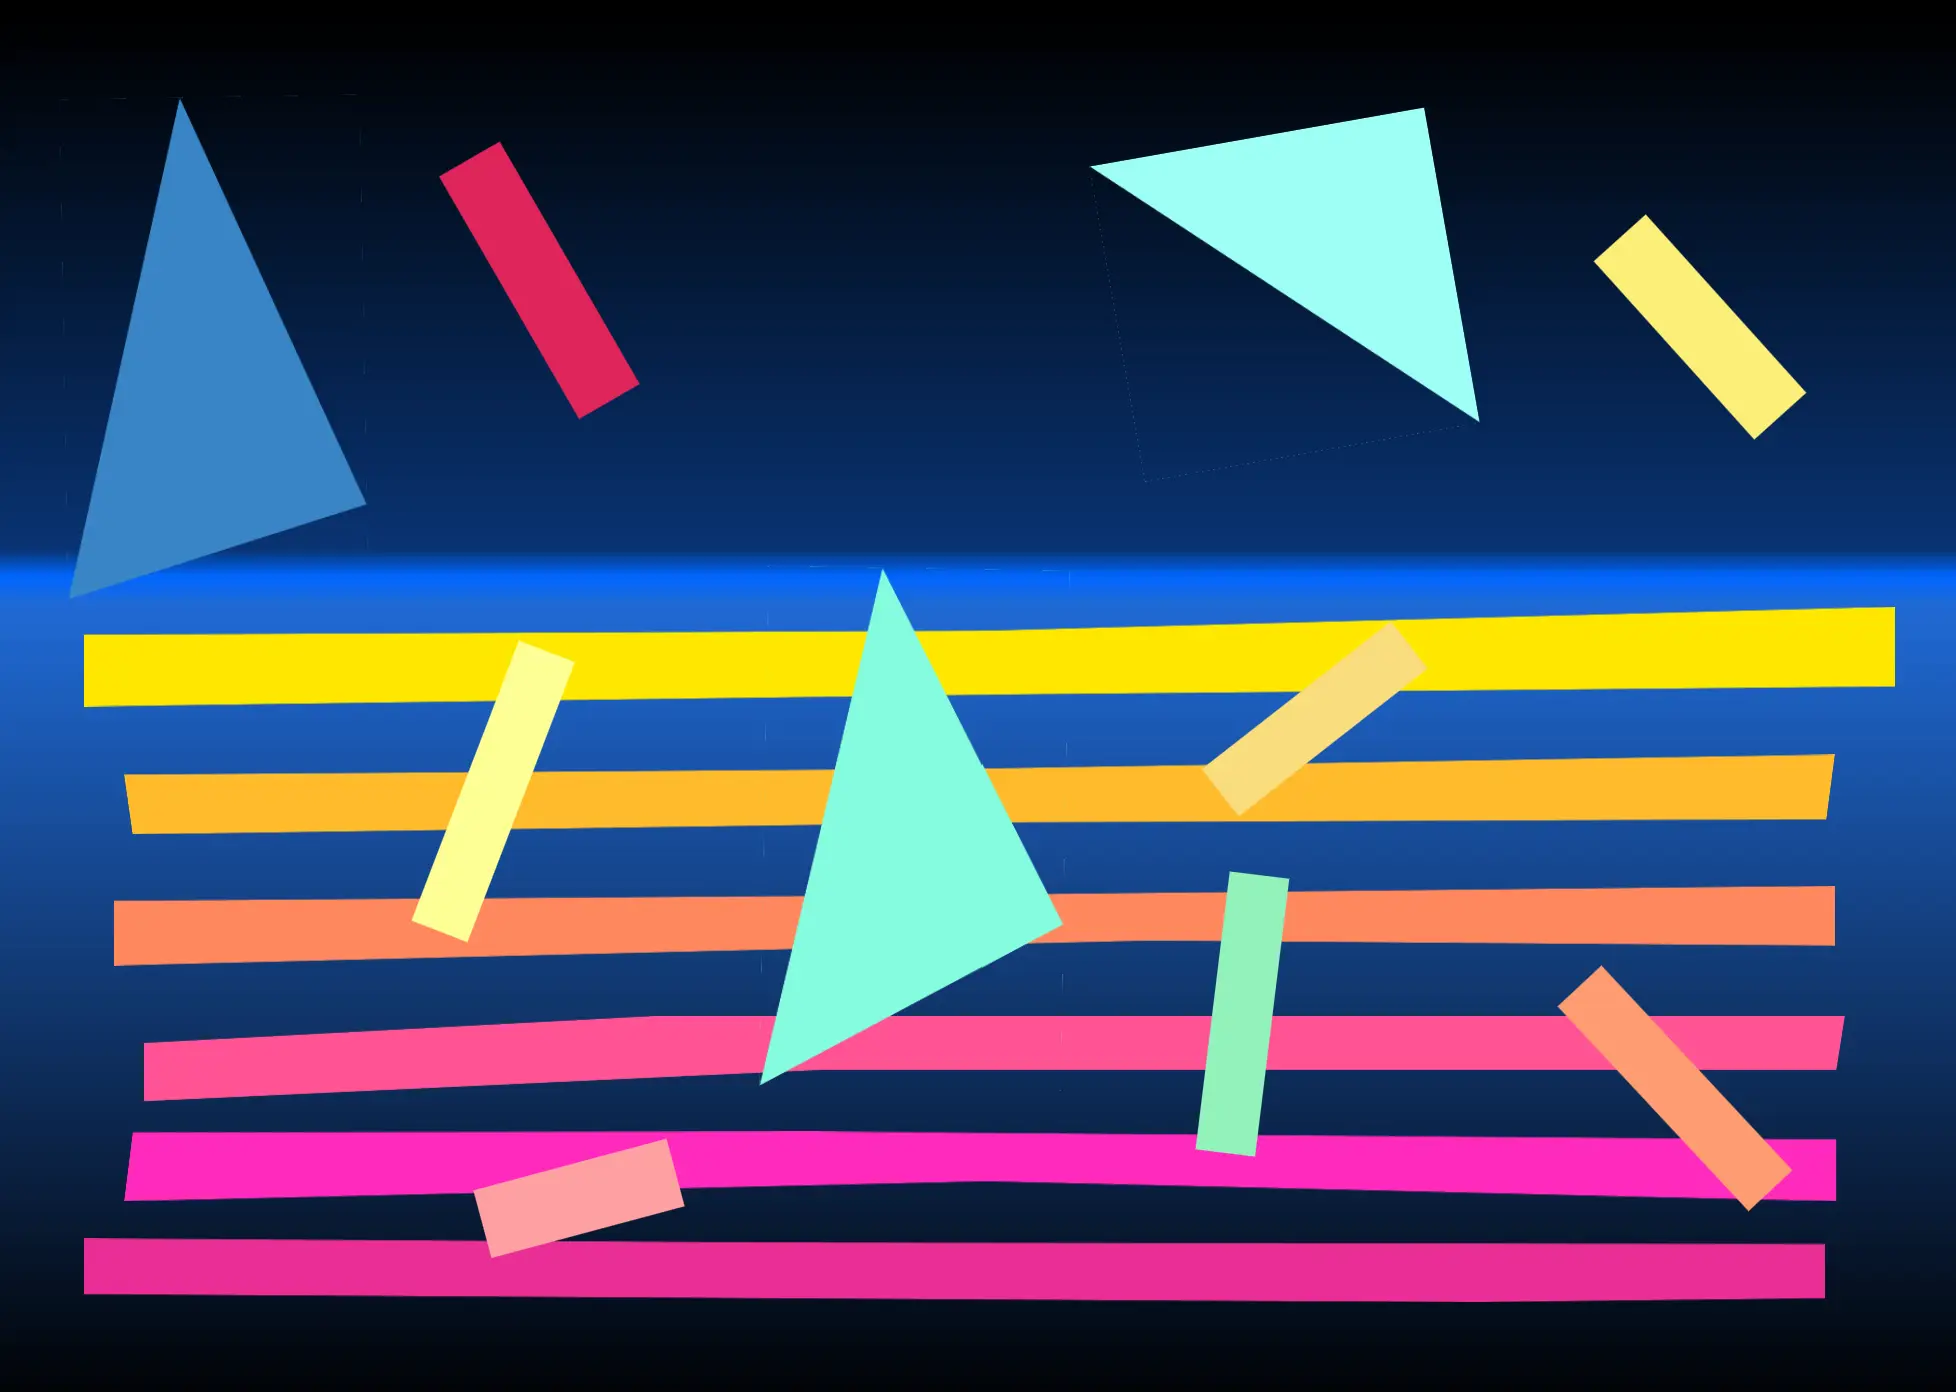 Preview - neon coloured triangles and waves against a dark background